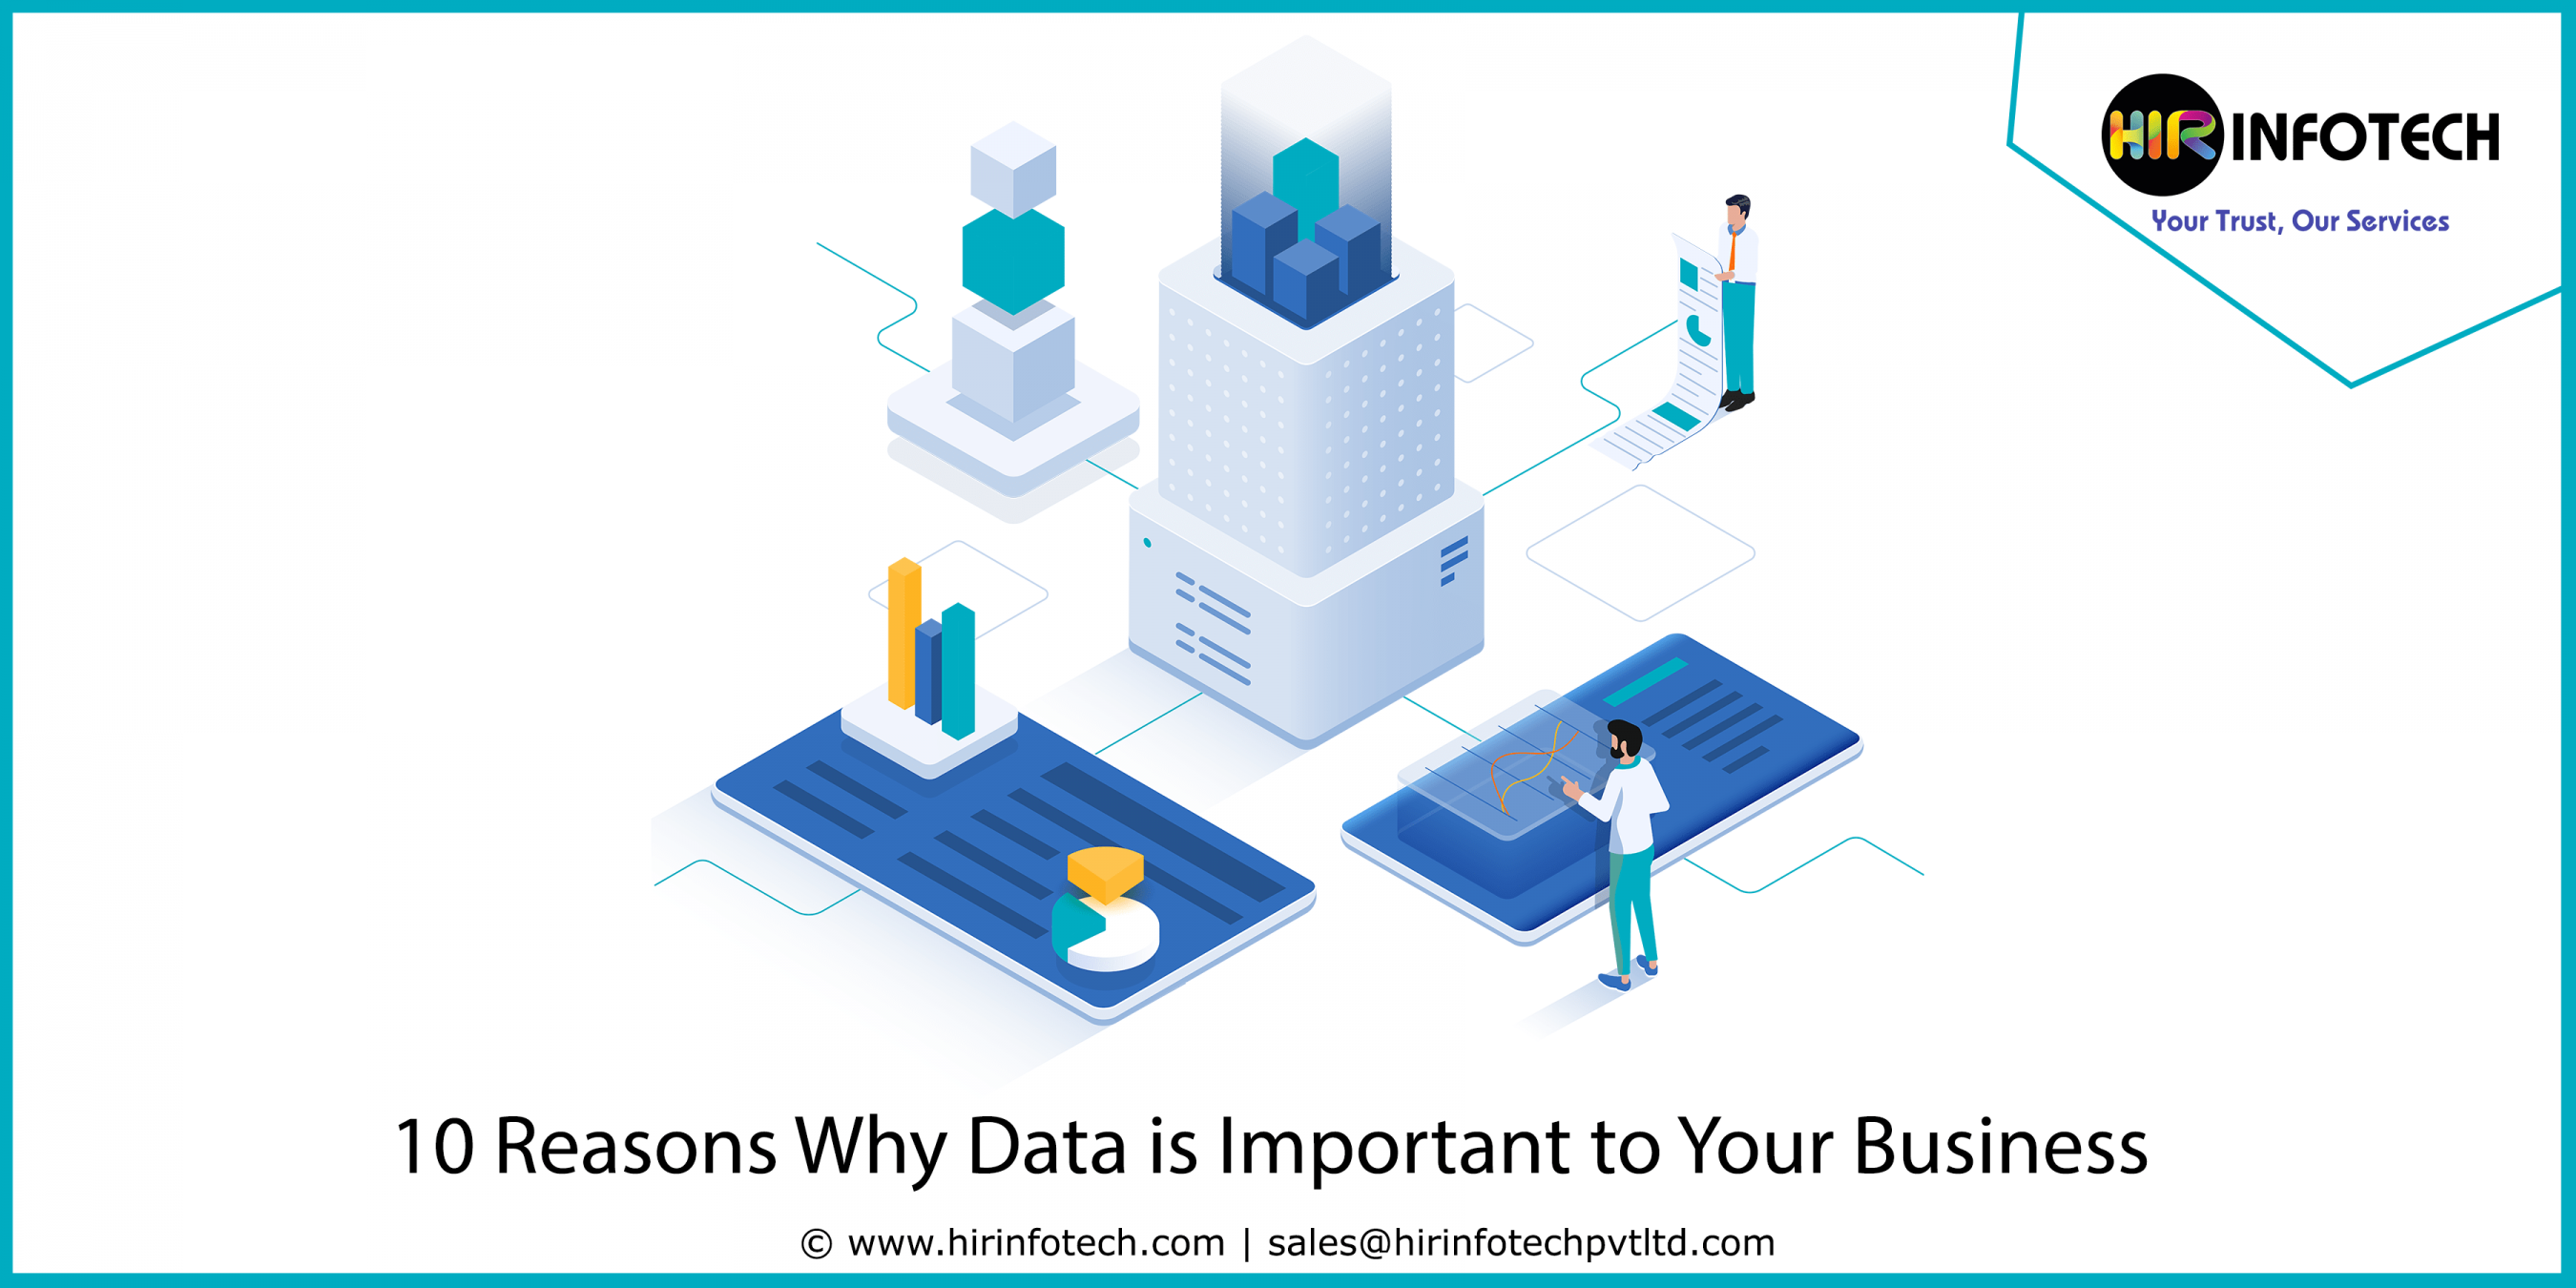 #Data #DataBase #Dataset #Email BusinessGrowth #WebScraping #DataCollection #USA #France #NewBlog #Technology